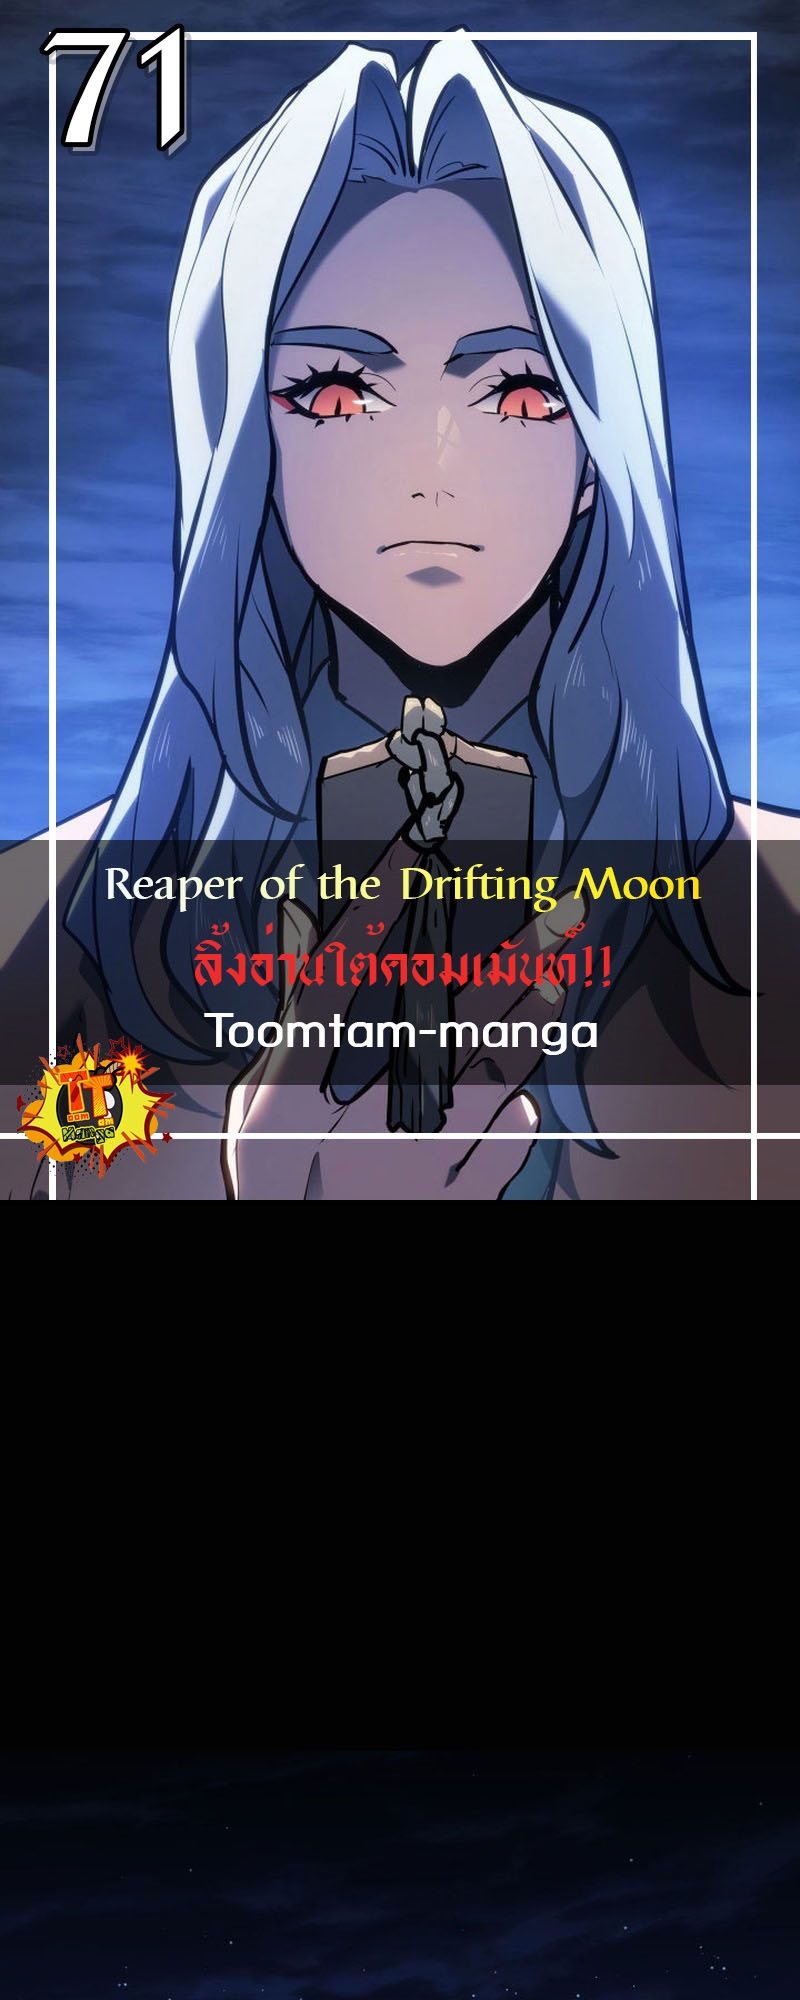 Reaper of the Drifting Moon 71 18 1 25670001